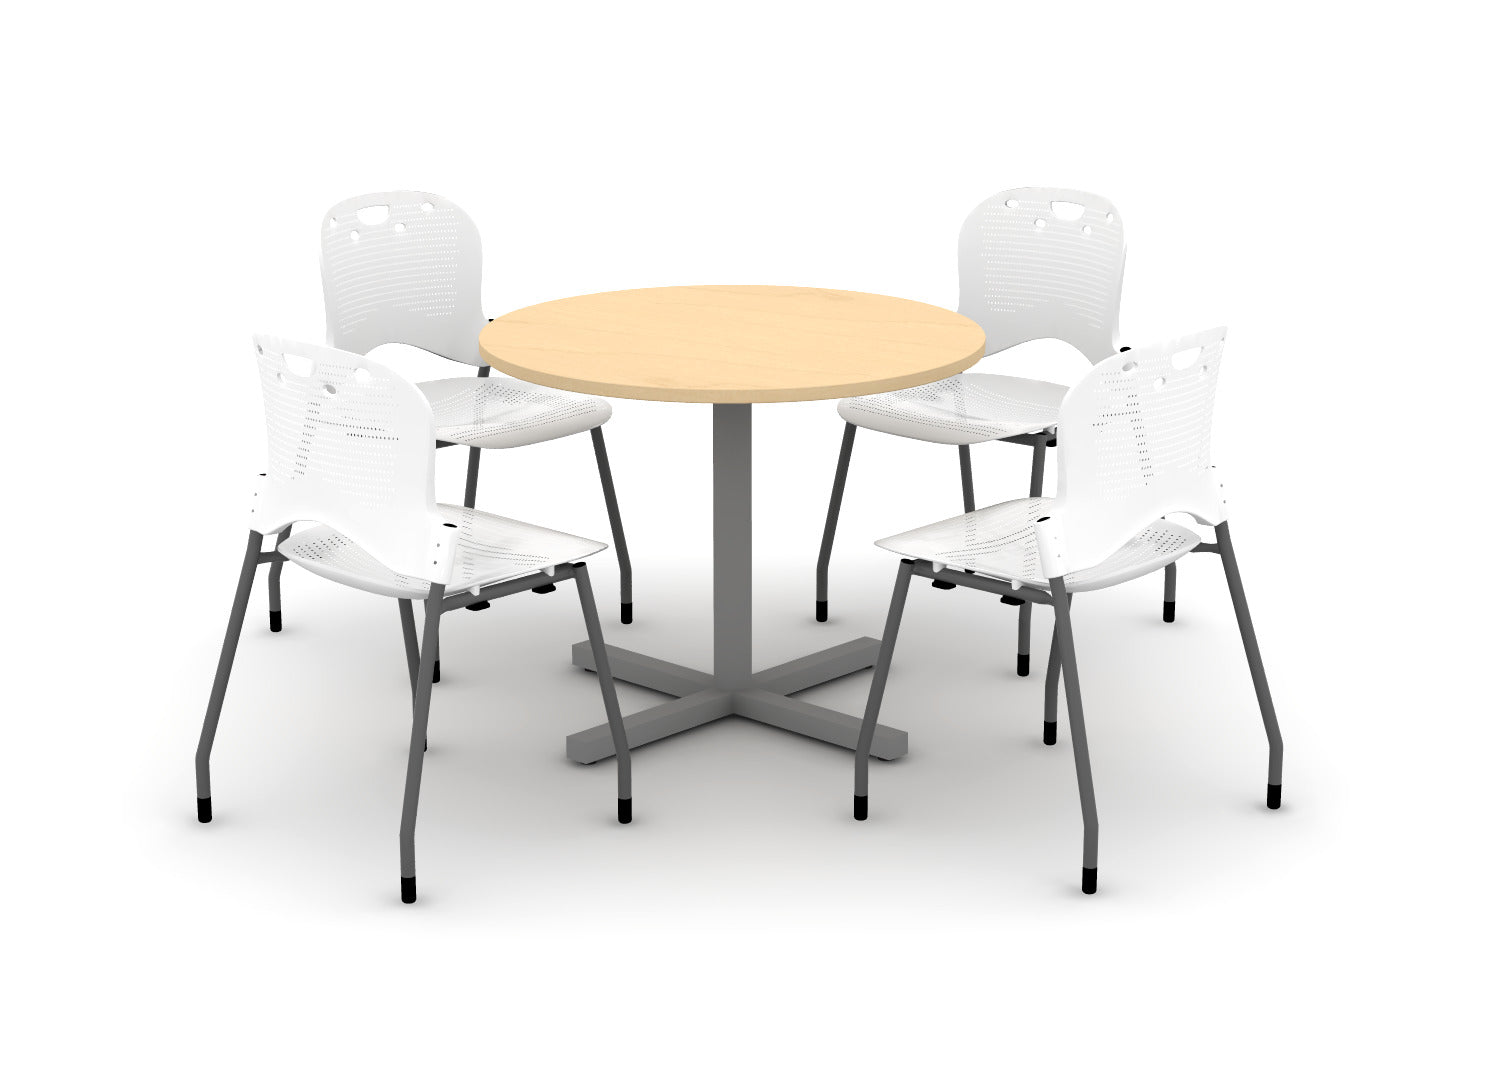 36" Round Table with Chairs